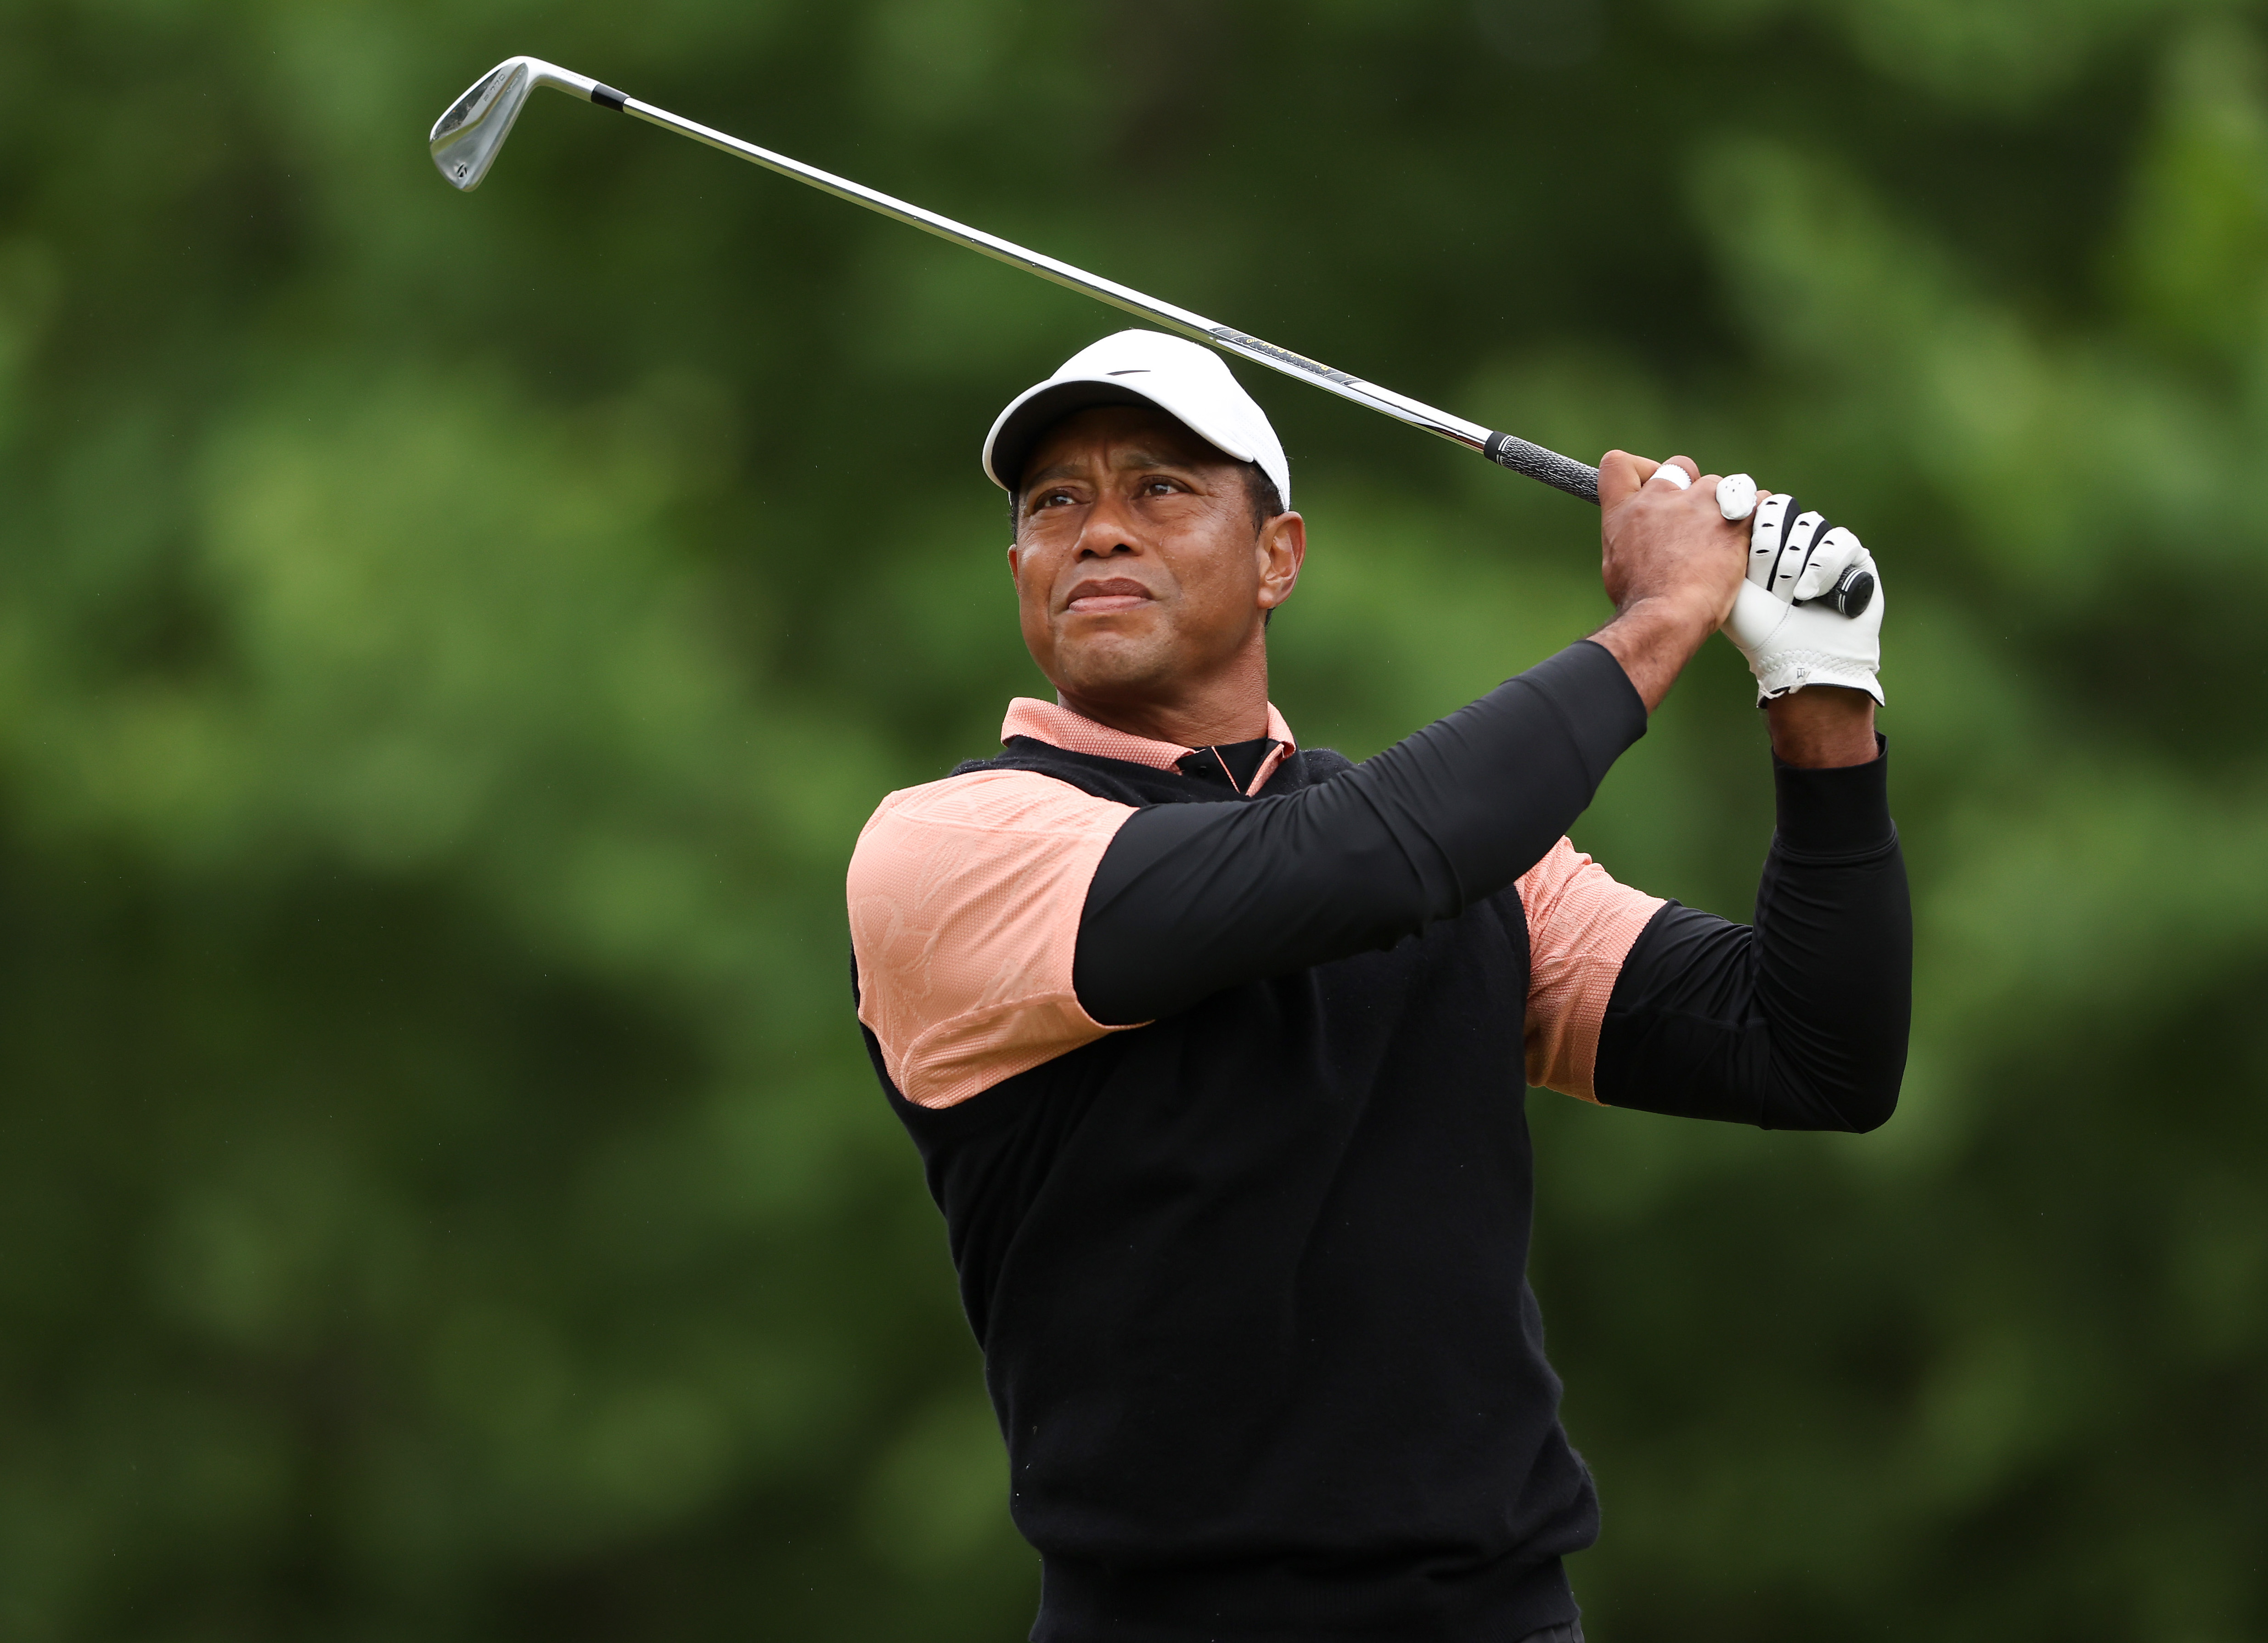 Tiger Woods Has The Longest Odds to Win This Weekend, But Bettors Don’t Care